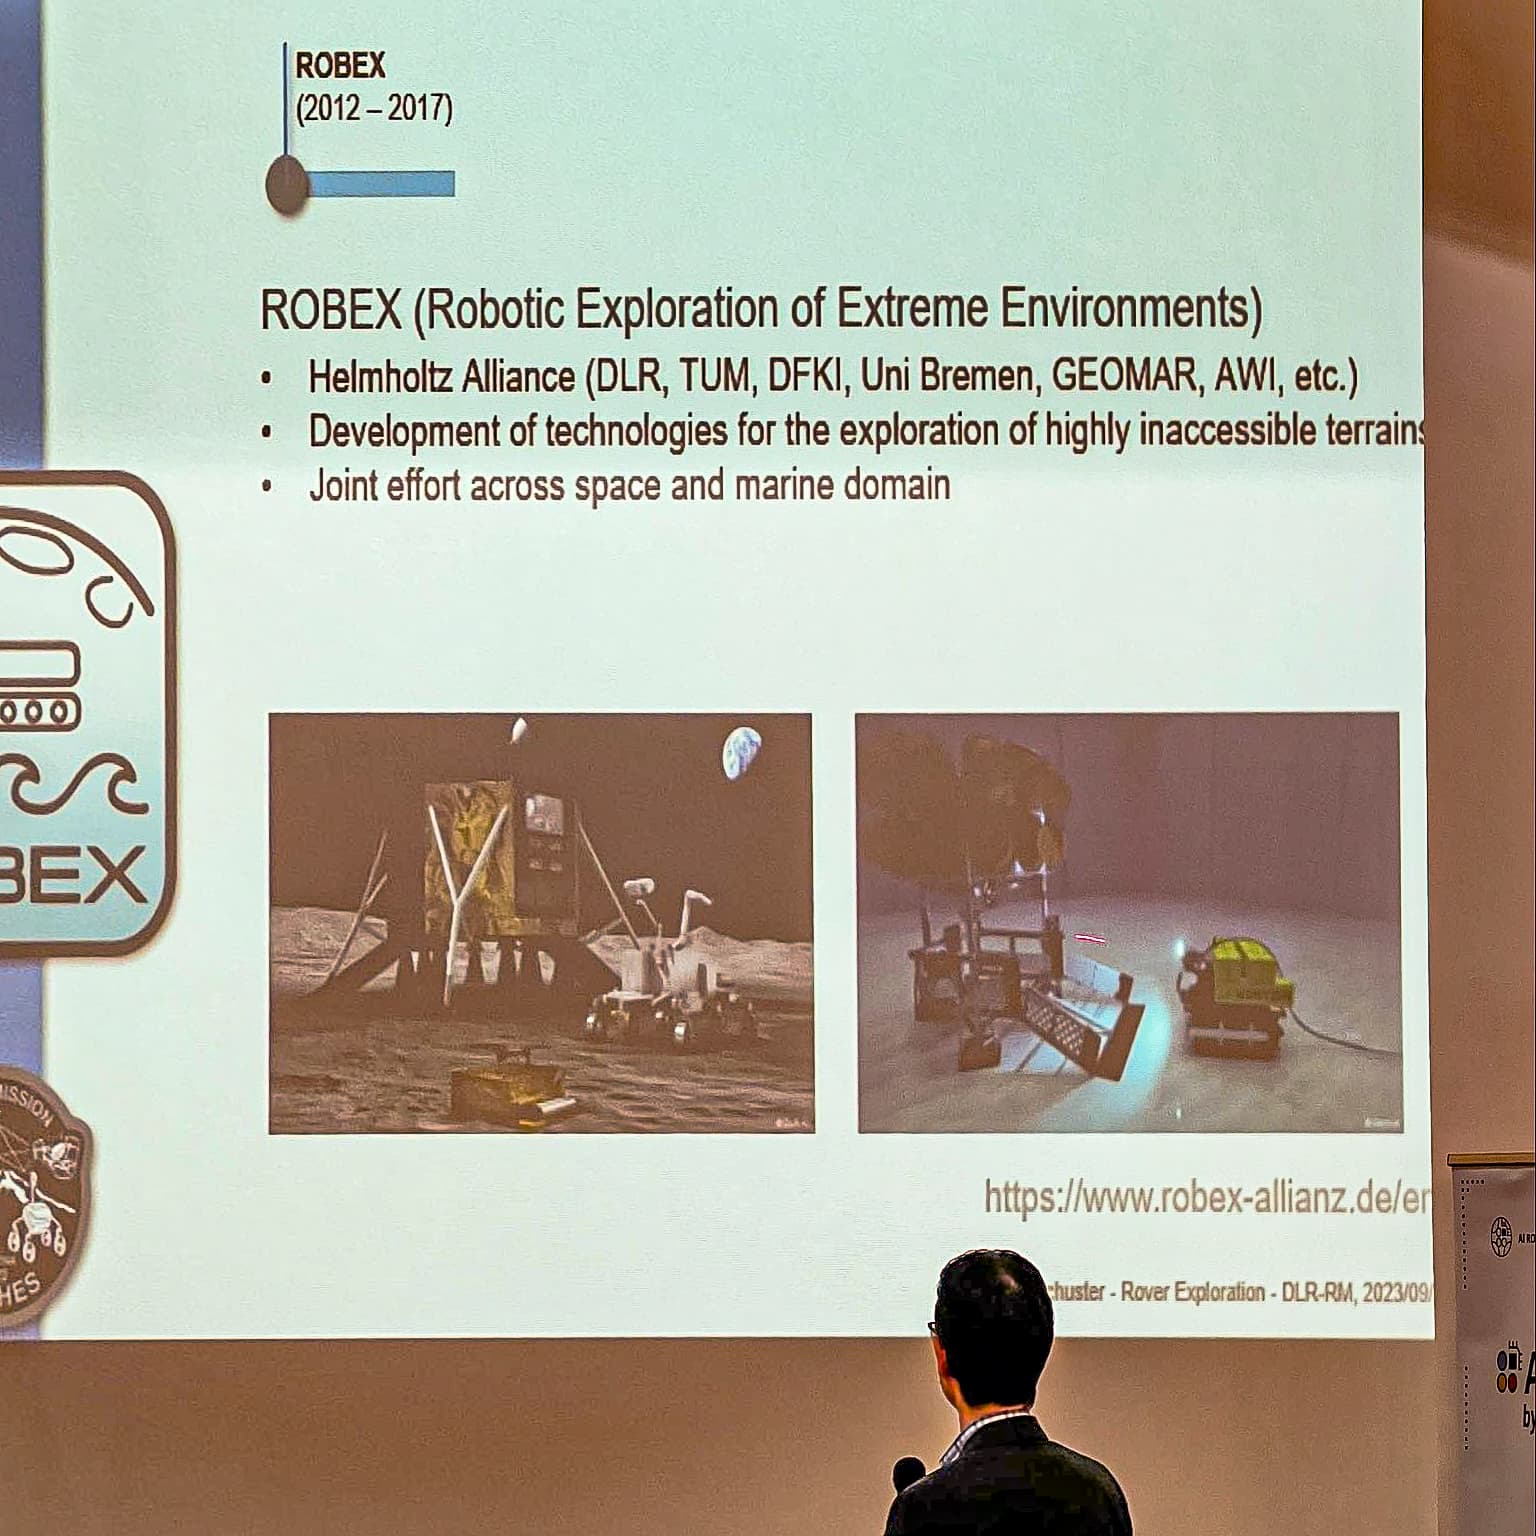 Dr. Ing. Martin J. Schuster - ROBEX (Robotic Exploration of Extreme Environments)